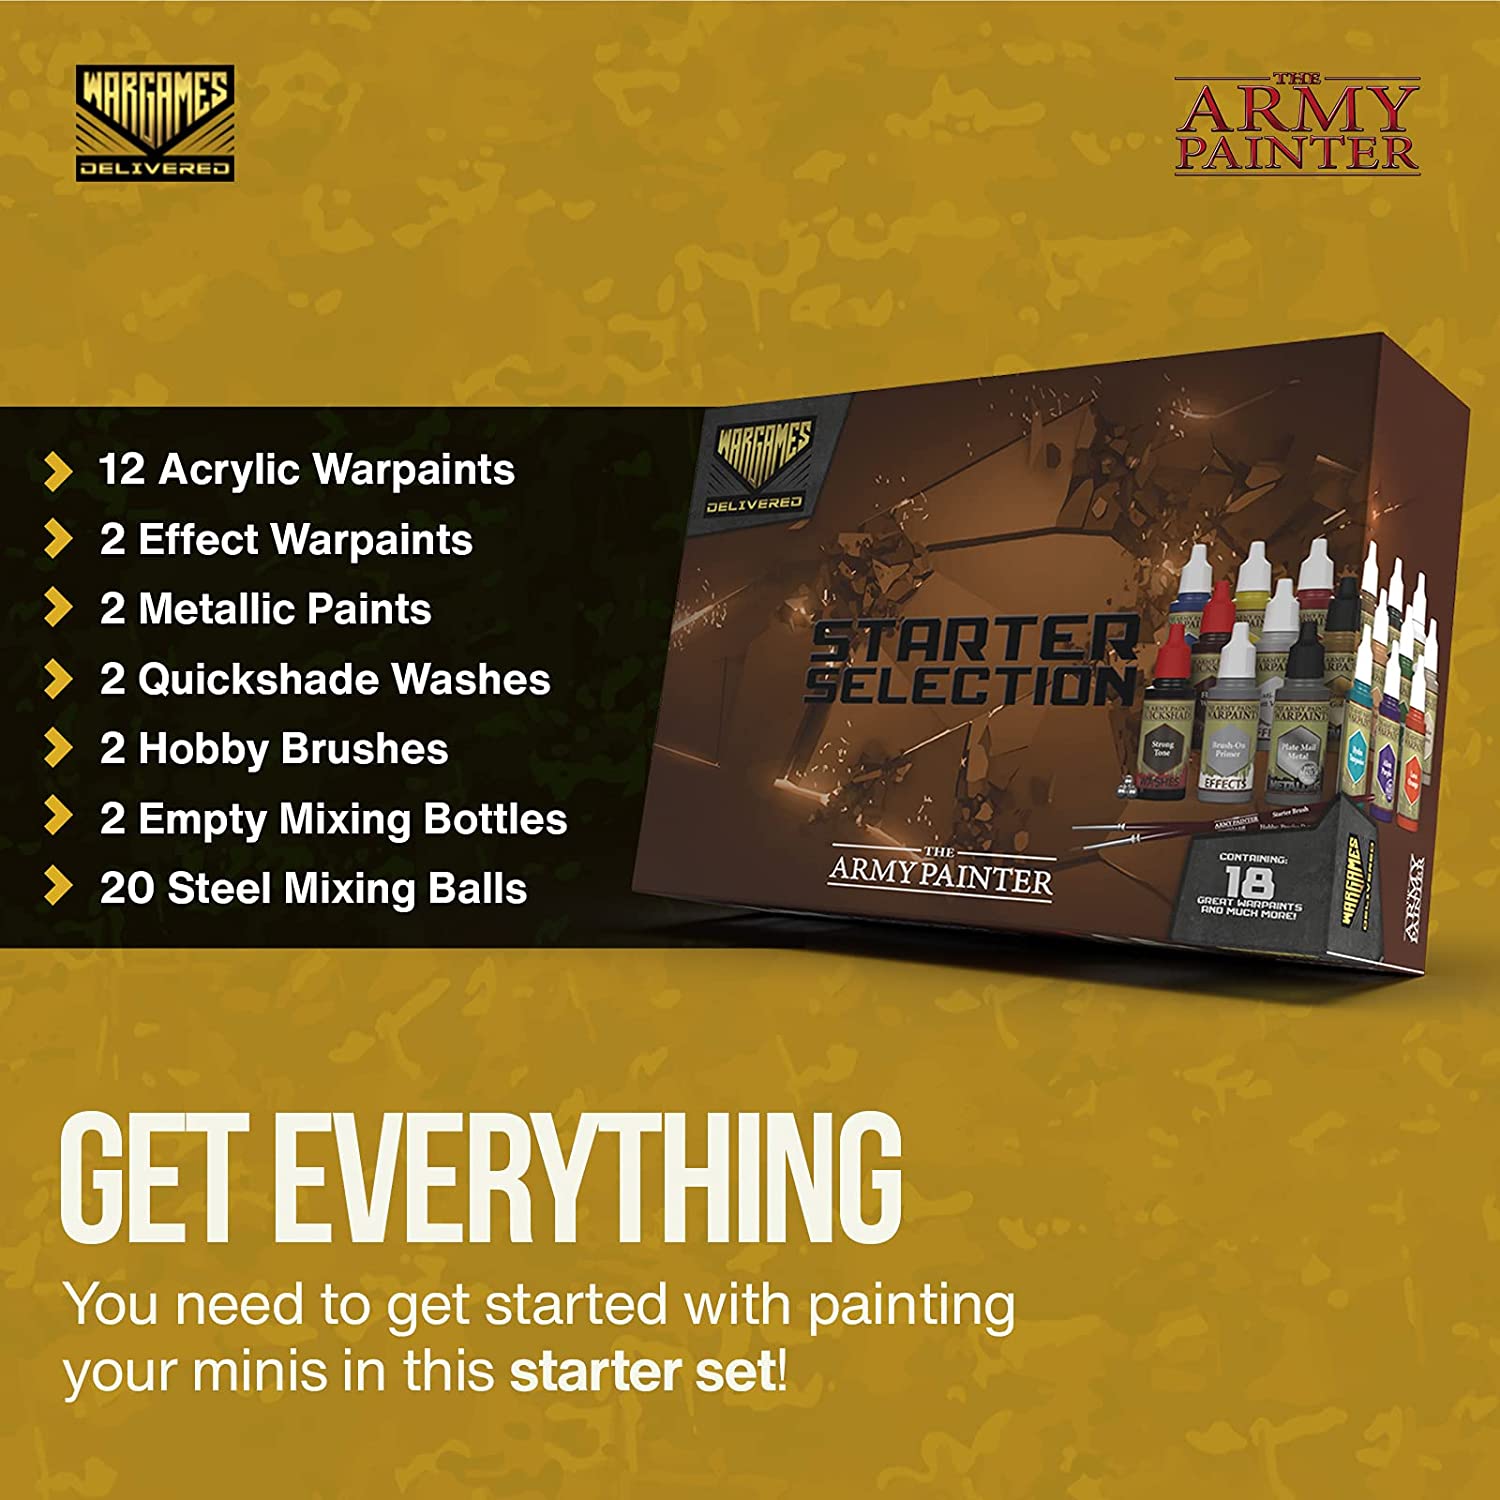 The Army Painter - Wargames Delivered Starter Miniature Paint Sets full kit